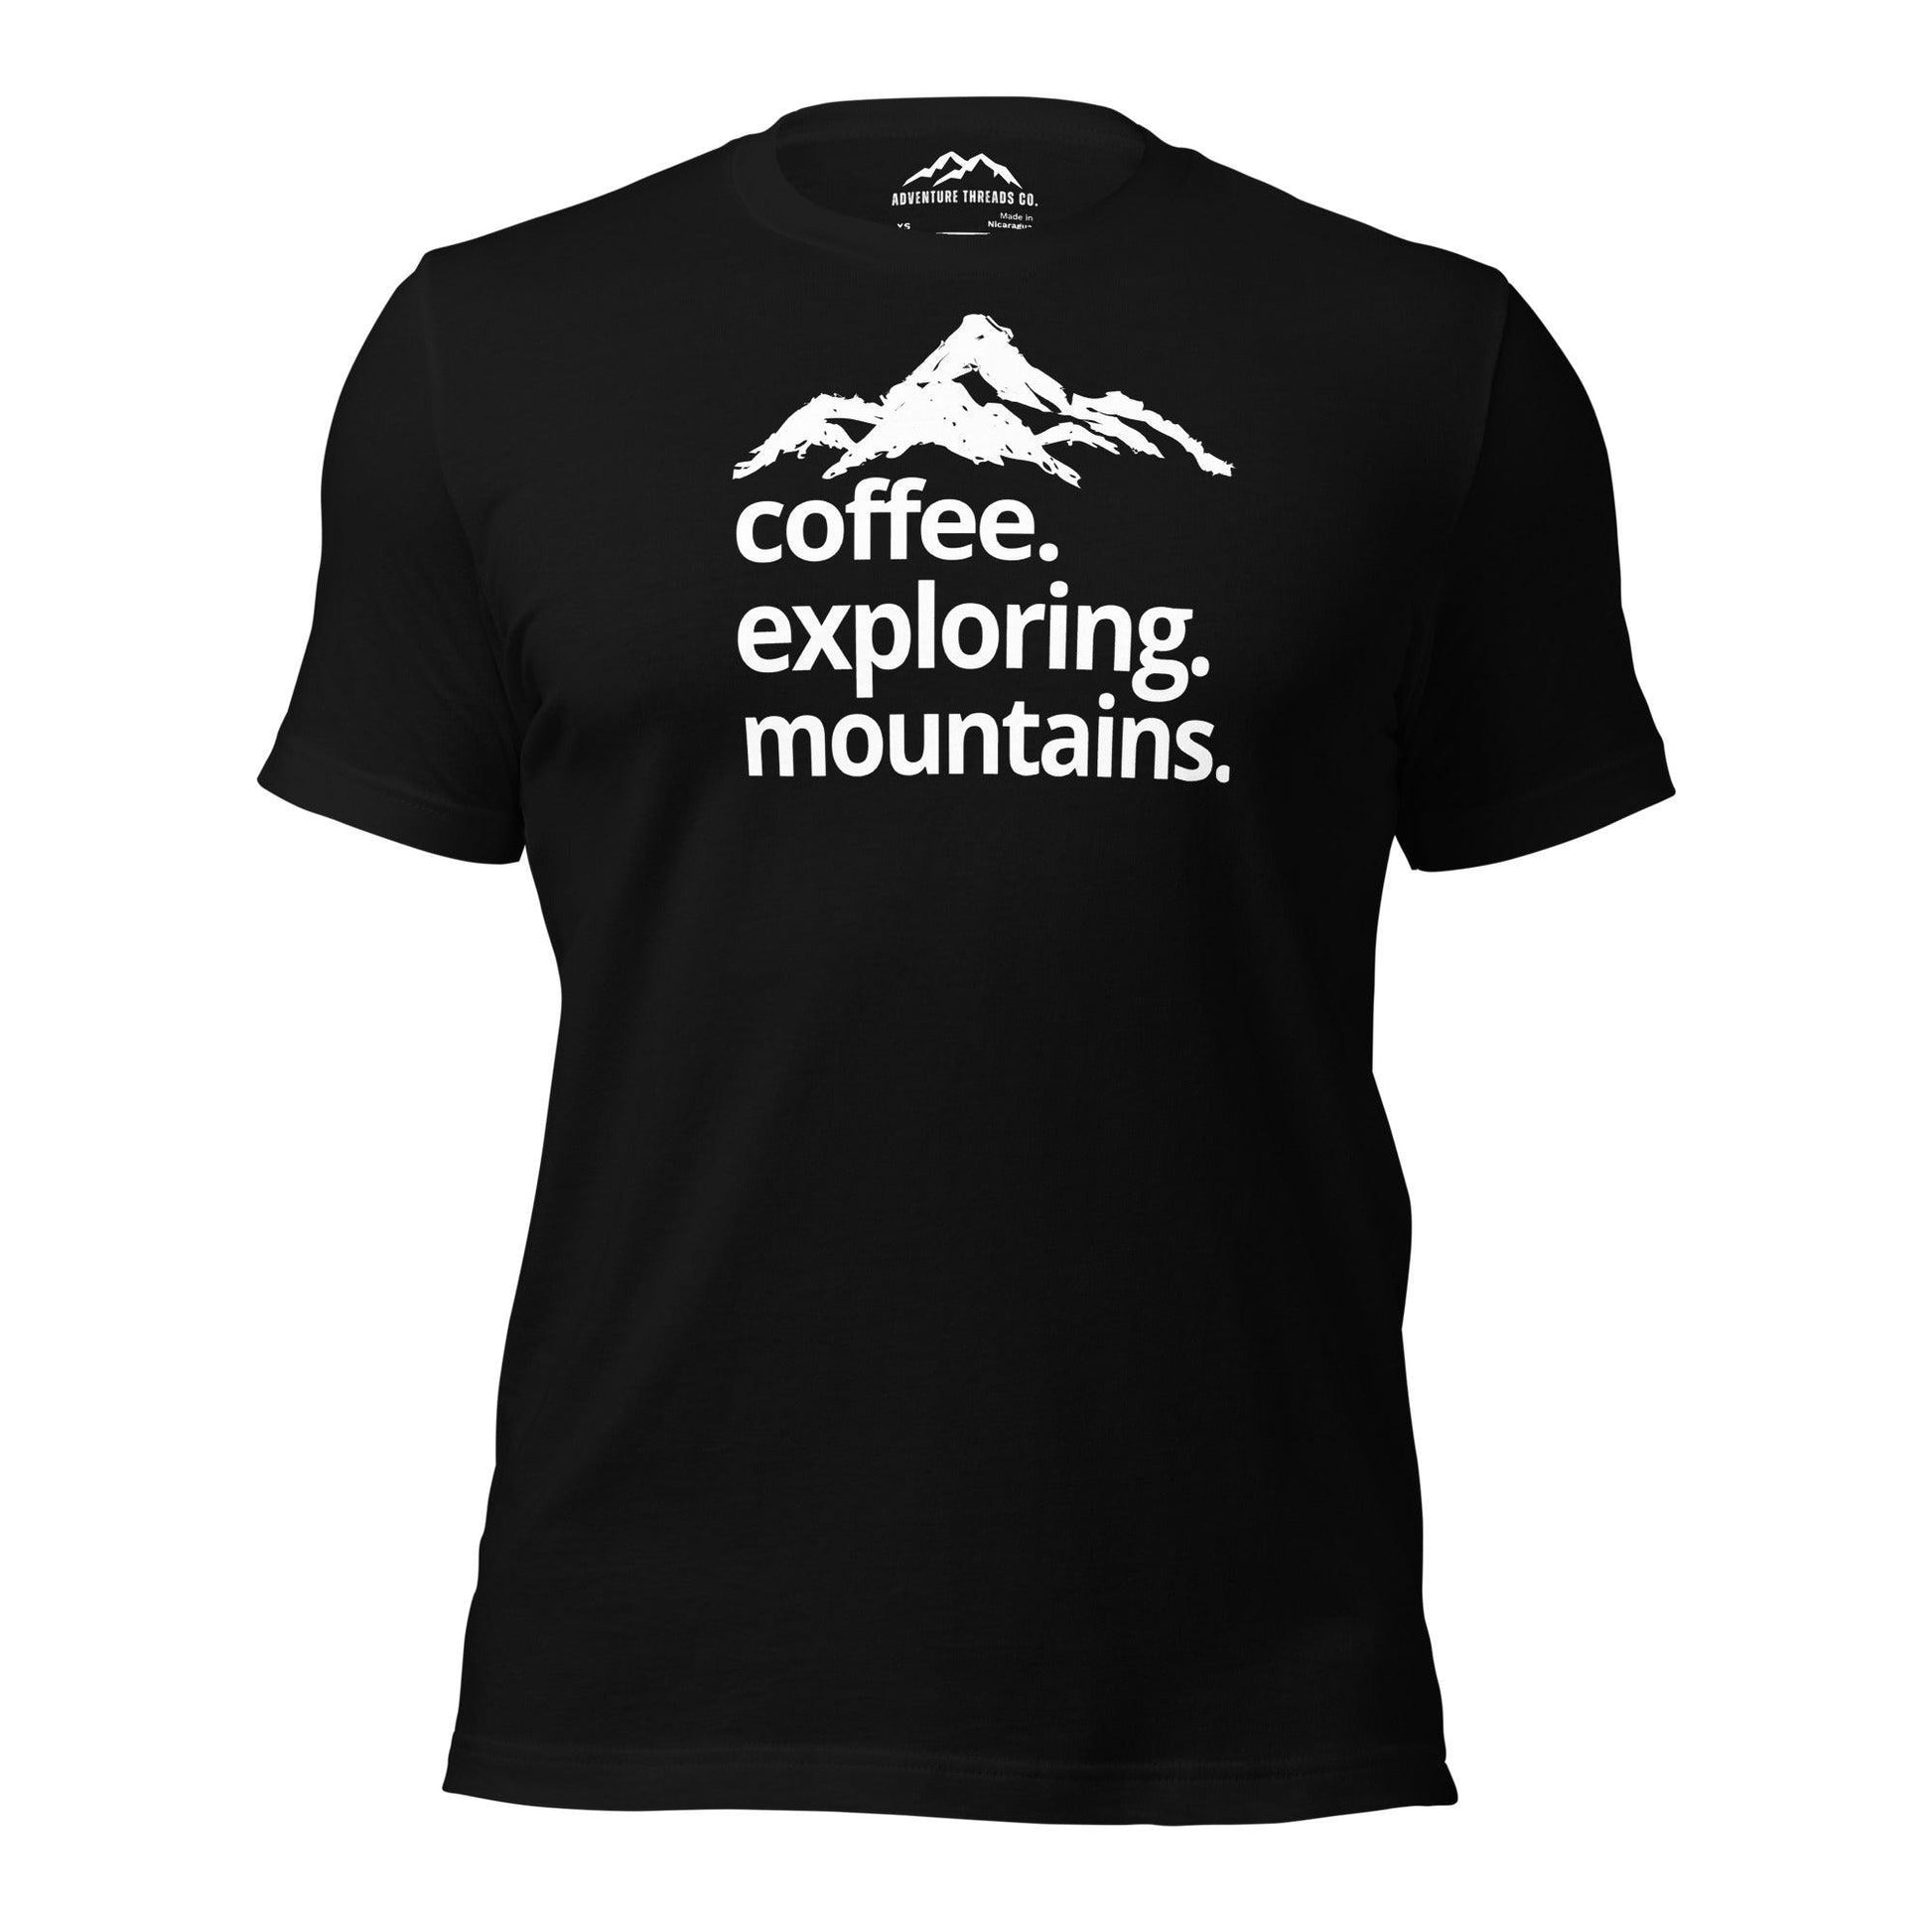 Coffee. Exploring. Mountains. T-Shirt - Adventure Threads Company